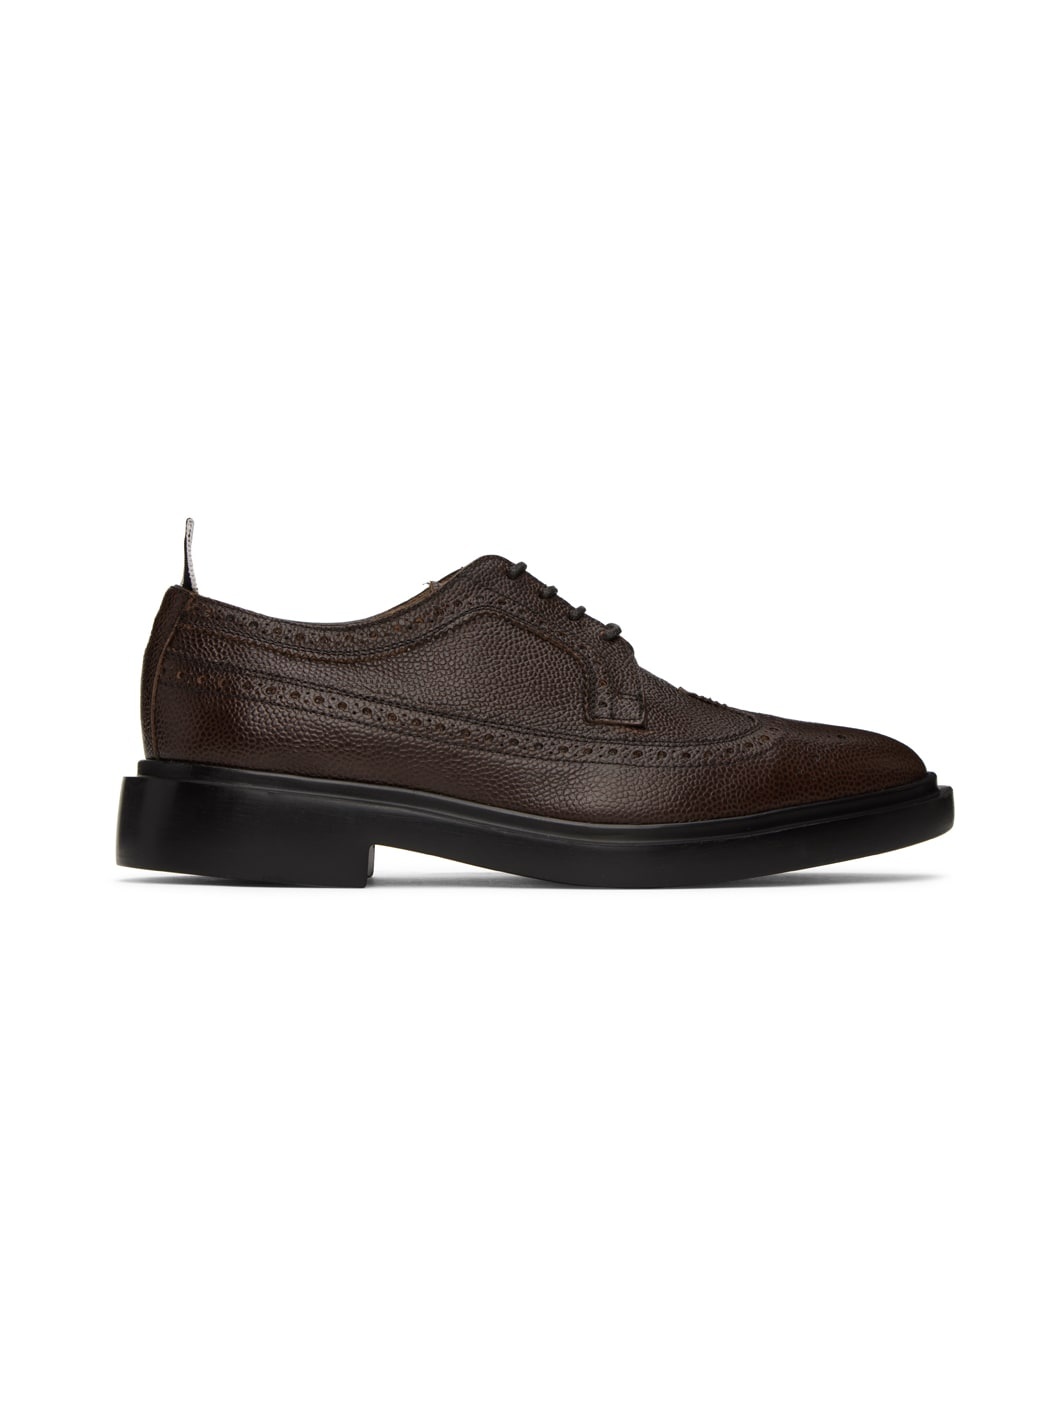 Brown Longwing Oxfords - 1